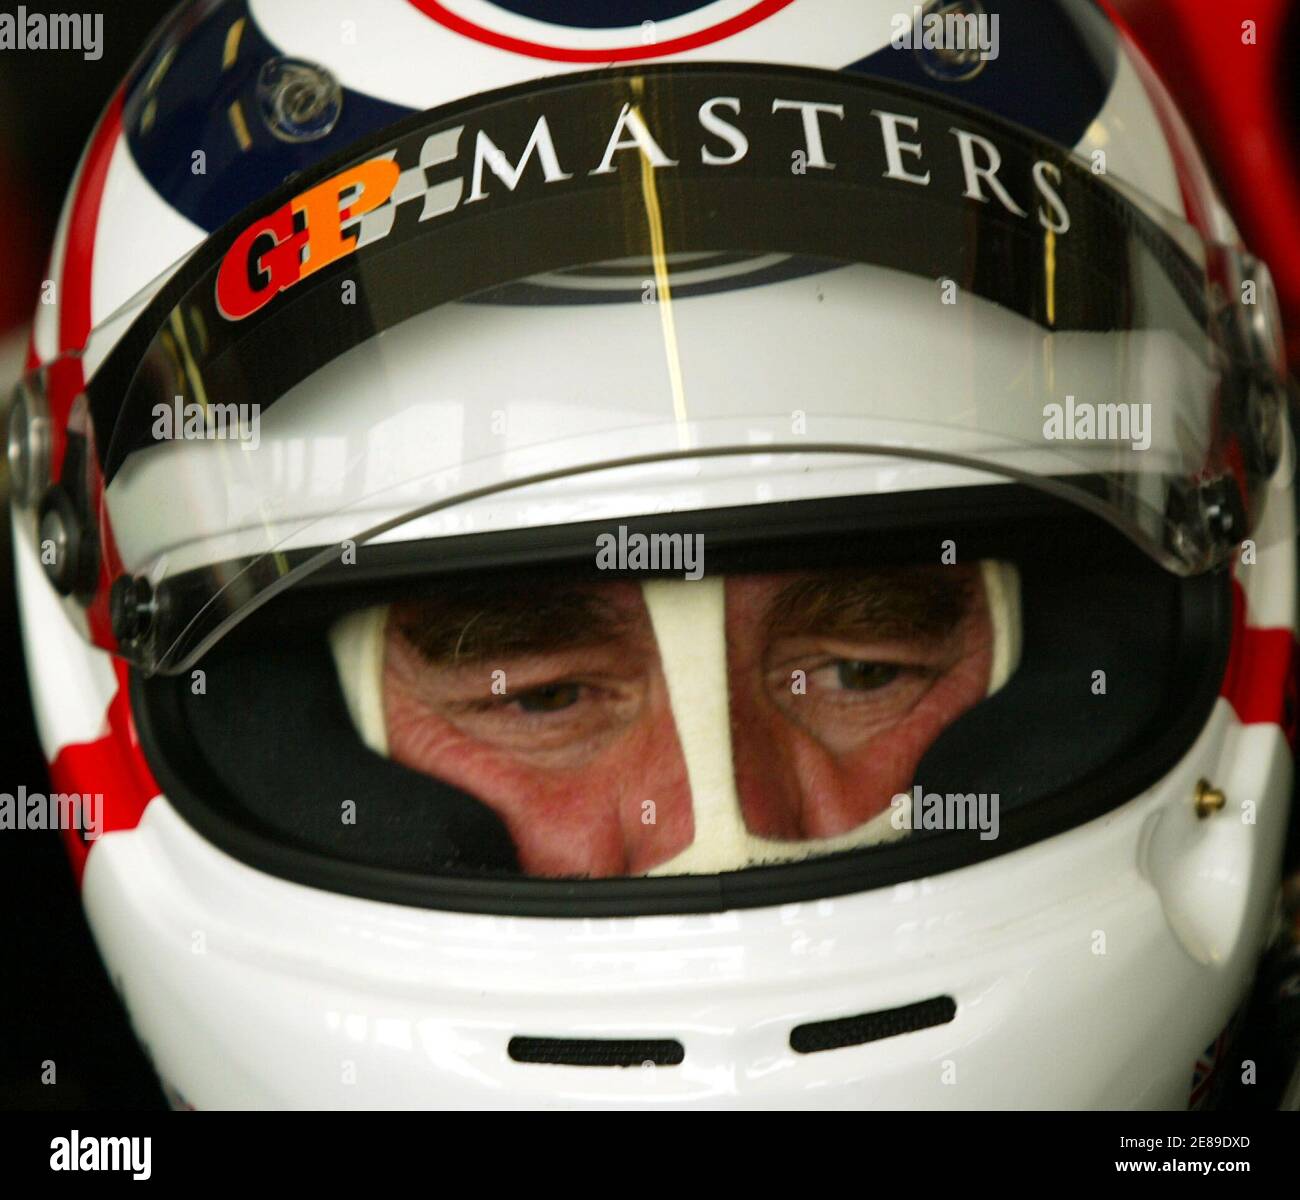 Britain's Nigel Mansell rides his Altech F-1 car during their free practice session in Kyalami north of Johannesburg November 11, 2005. The Grand Prix race takes place on Sunday. REUTERS Juda Ngwenya Stock Photo